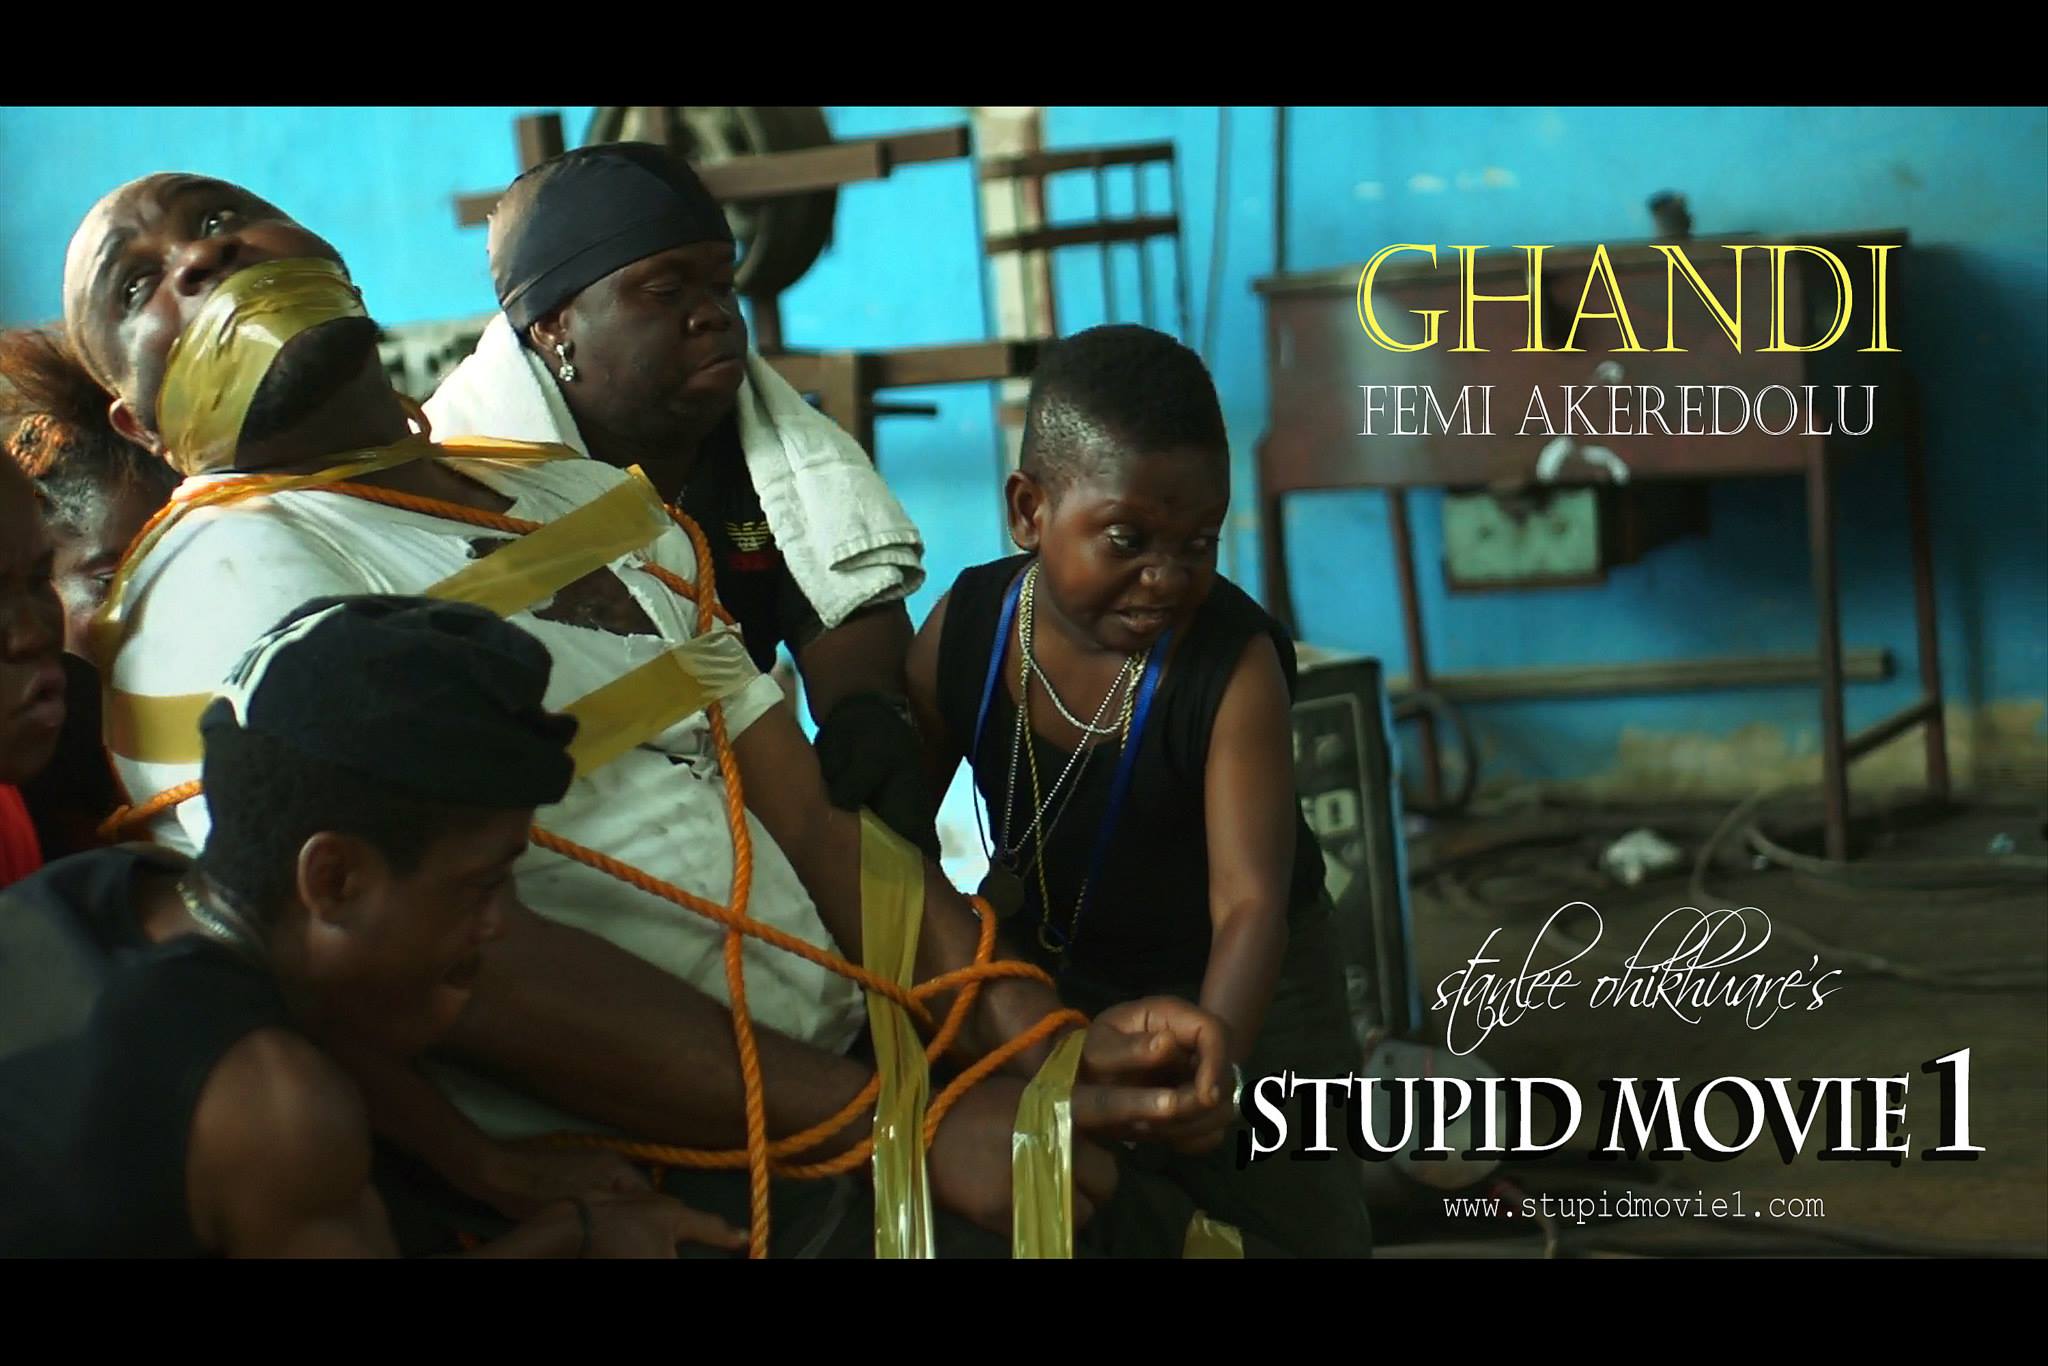 CHARACTER POSTER (GHANDI) for Stanlee Ohikhuare's STUPID MOVIE 1